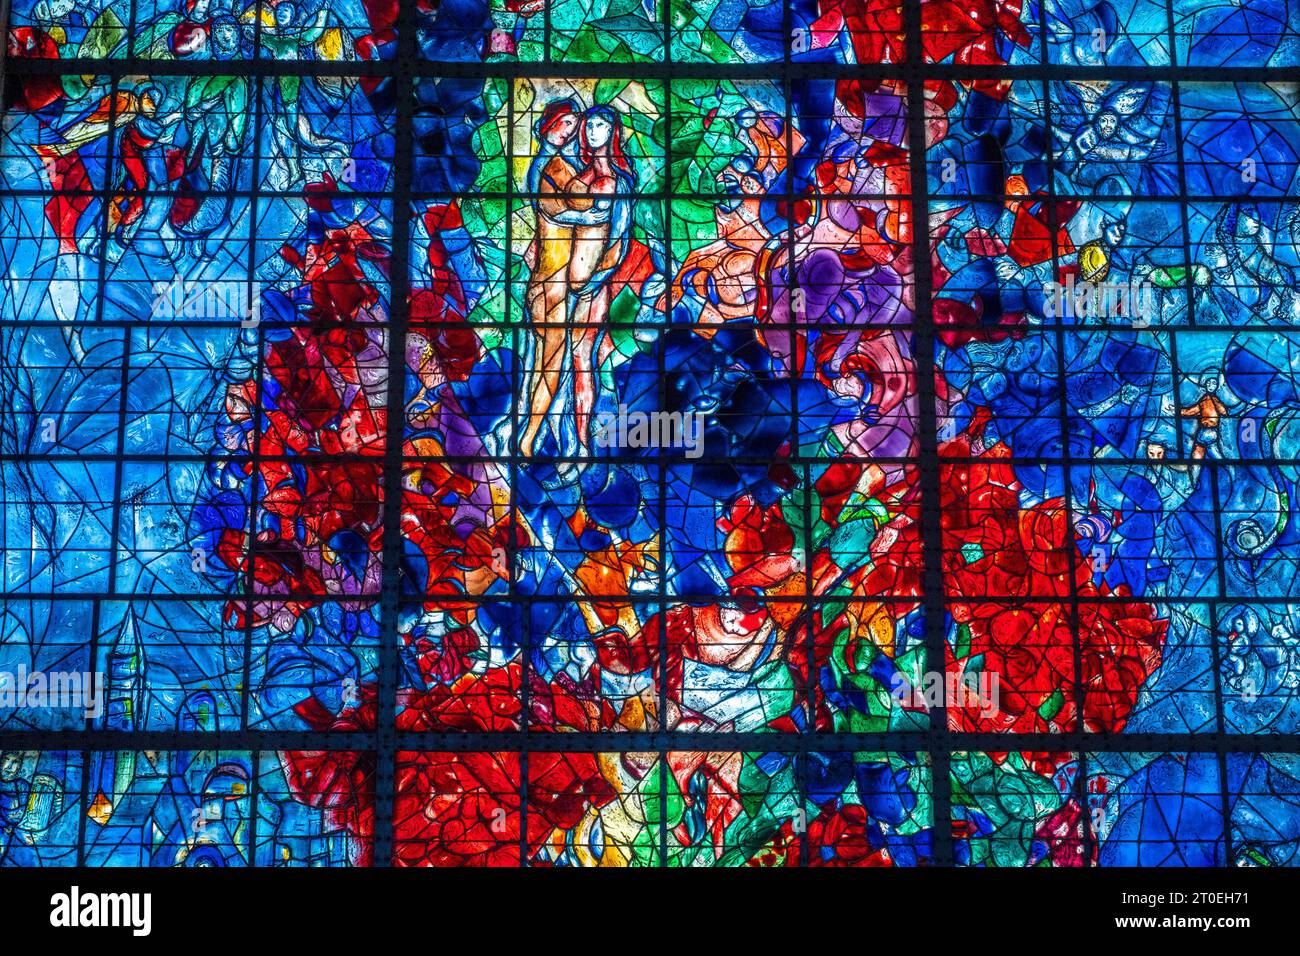 Stained glass window by Marc Chagall (Chagall window) in the Chapelle des Cordeliers, Saarebourg, Grand Est region, Moselle department, Grand Est, France. Stock Photo